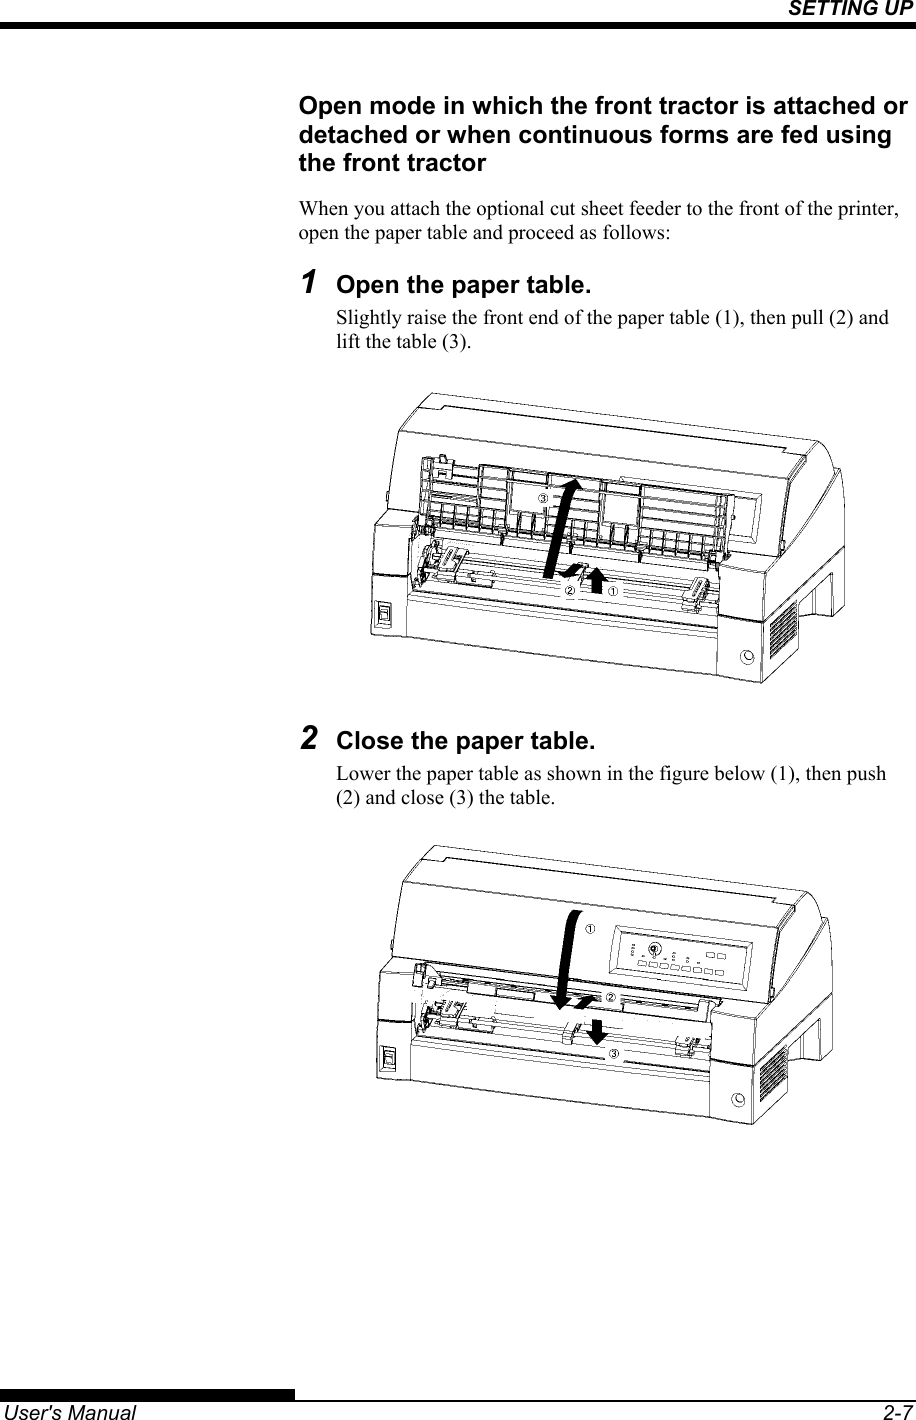 SETTING UP   User&apos;s Manual  2-7 Open mode in which the front tractor is attached or detached or when continuous forms are fed using the front tractor When you attach the optional cut sheet feeder to the front of the printer, open the paper table and proceed as follows: 1  Open the paper table. Slightly raise the front end of the paper table (1), then pull (2) and lift the table (3).  2  Close the paper table. Lower the paper table as shown in the figure below (1), then push (2) and close (3) the table.  